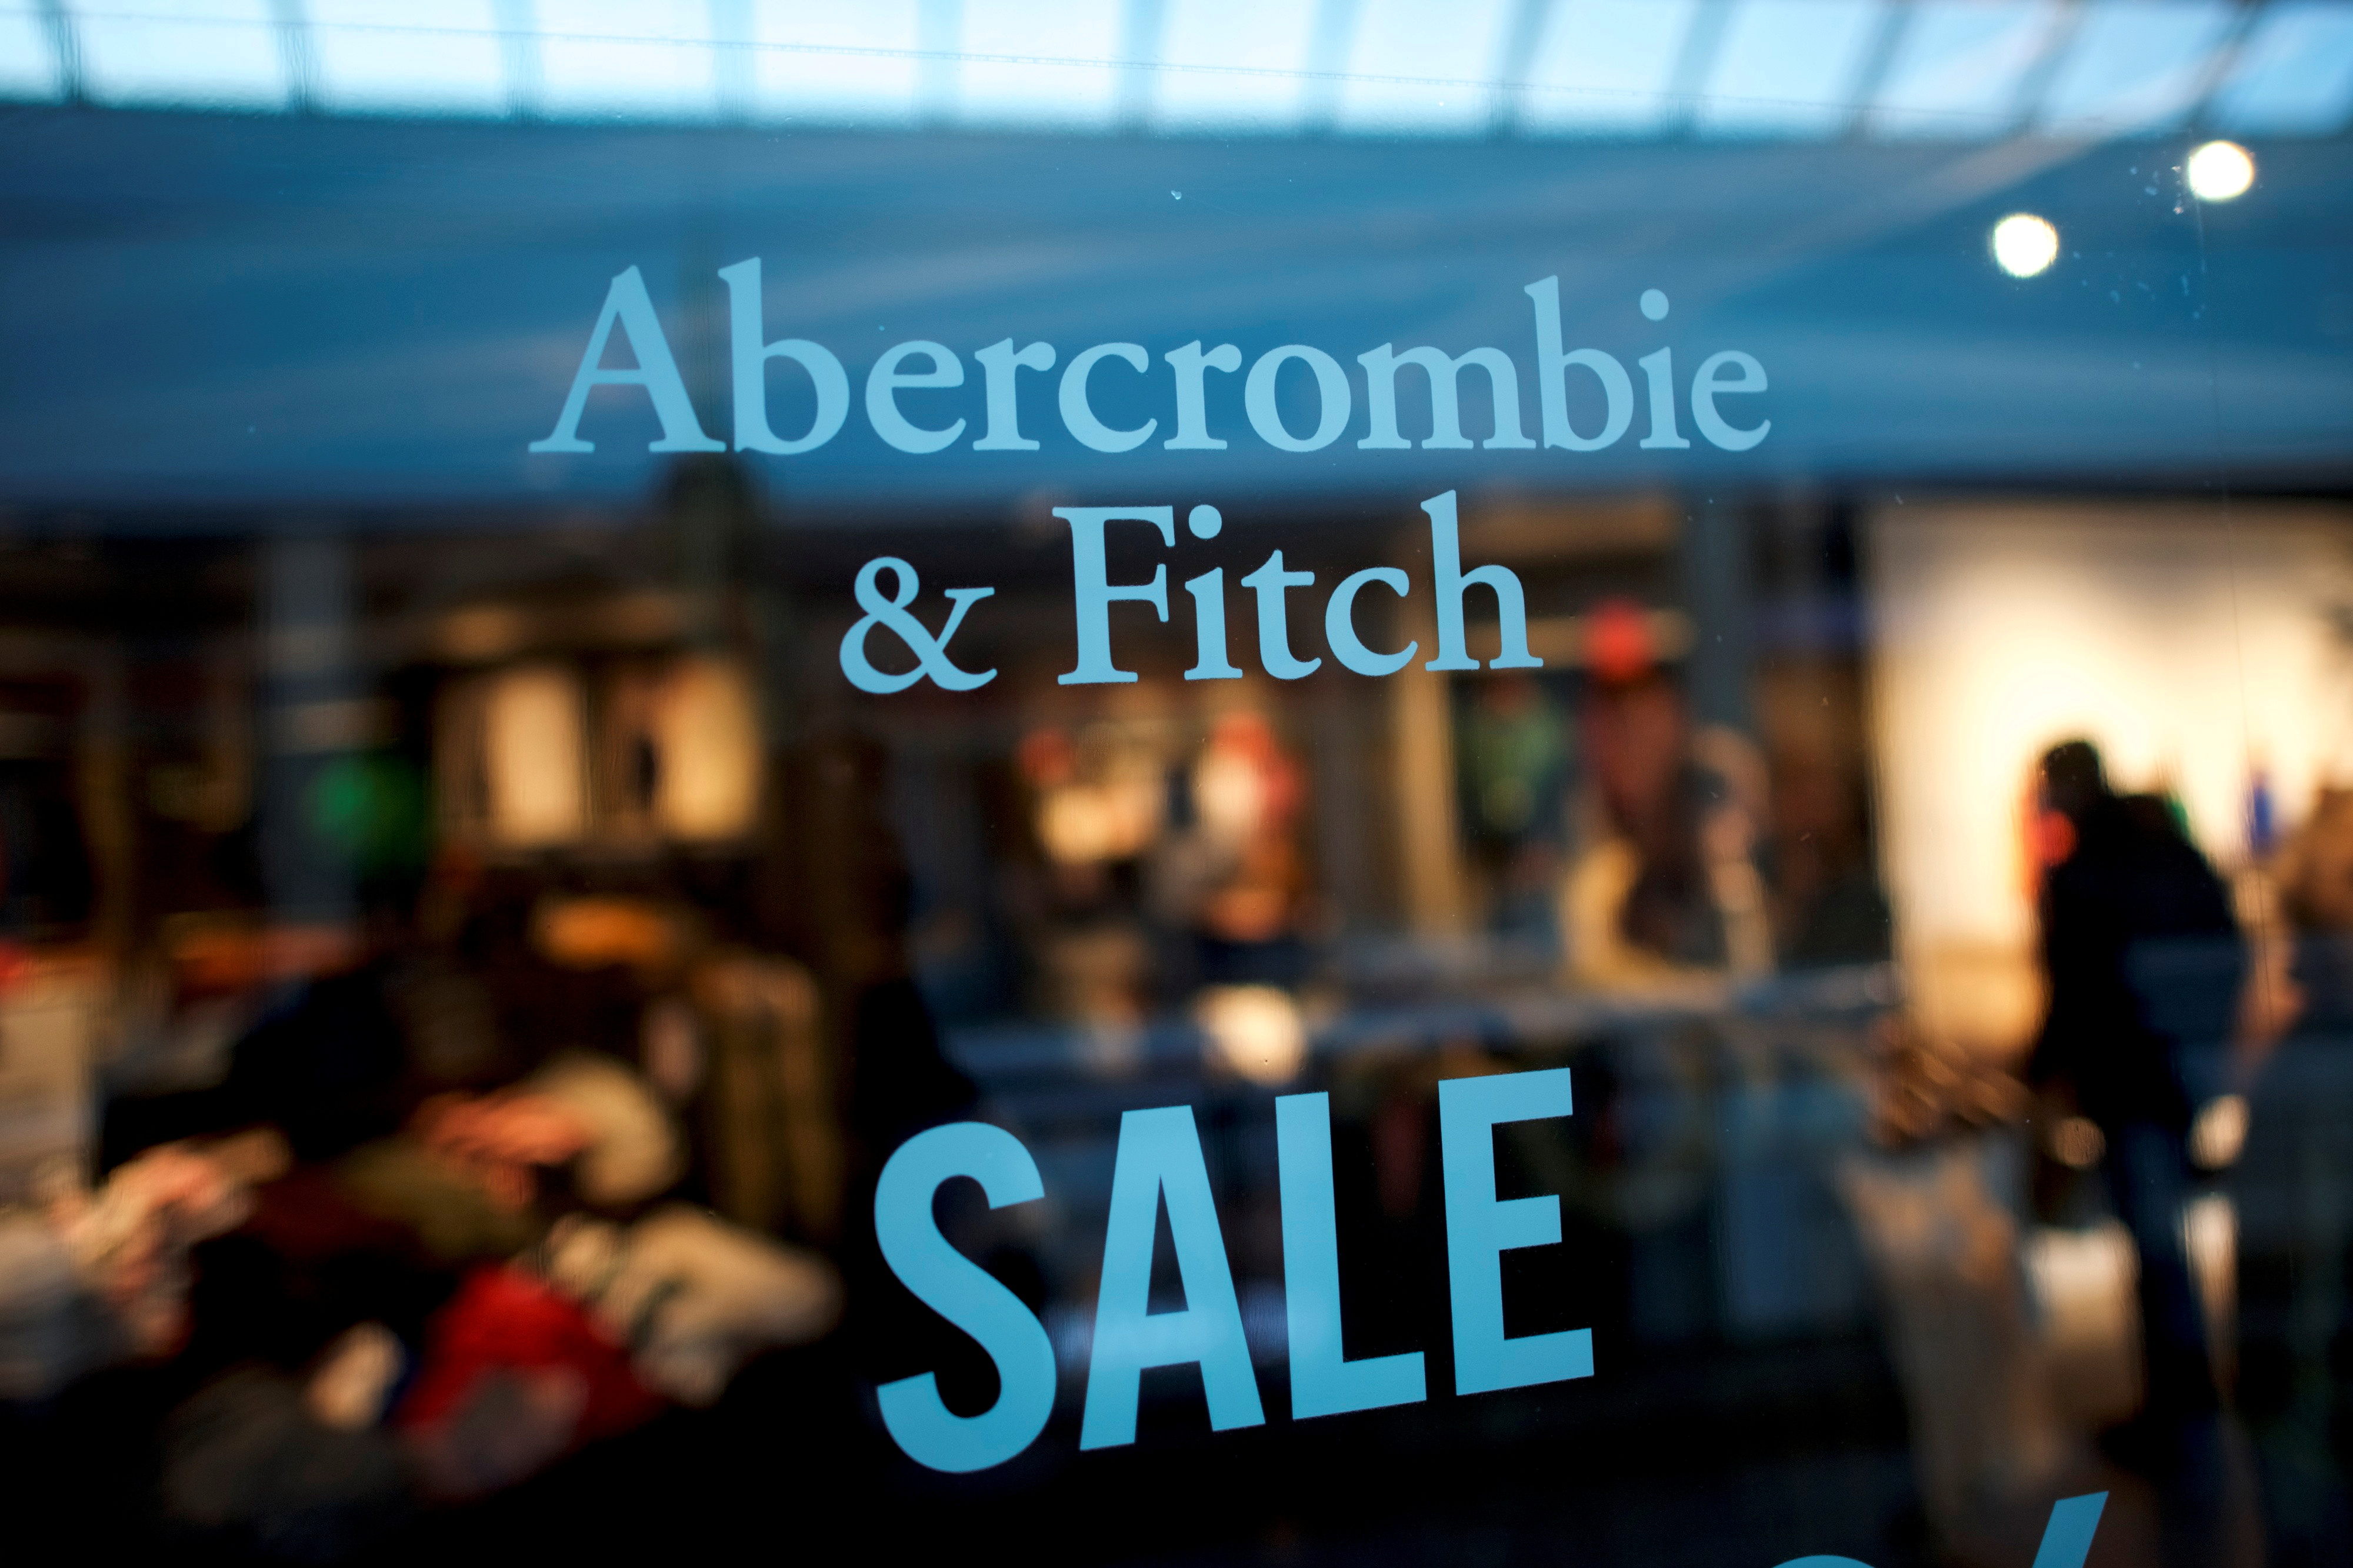 An Abercrombie & Fitch storefront sign states 